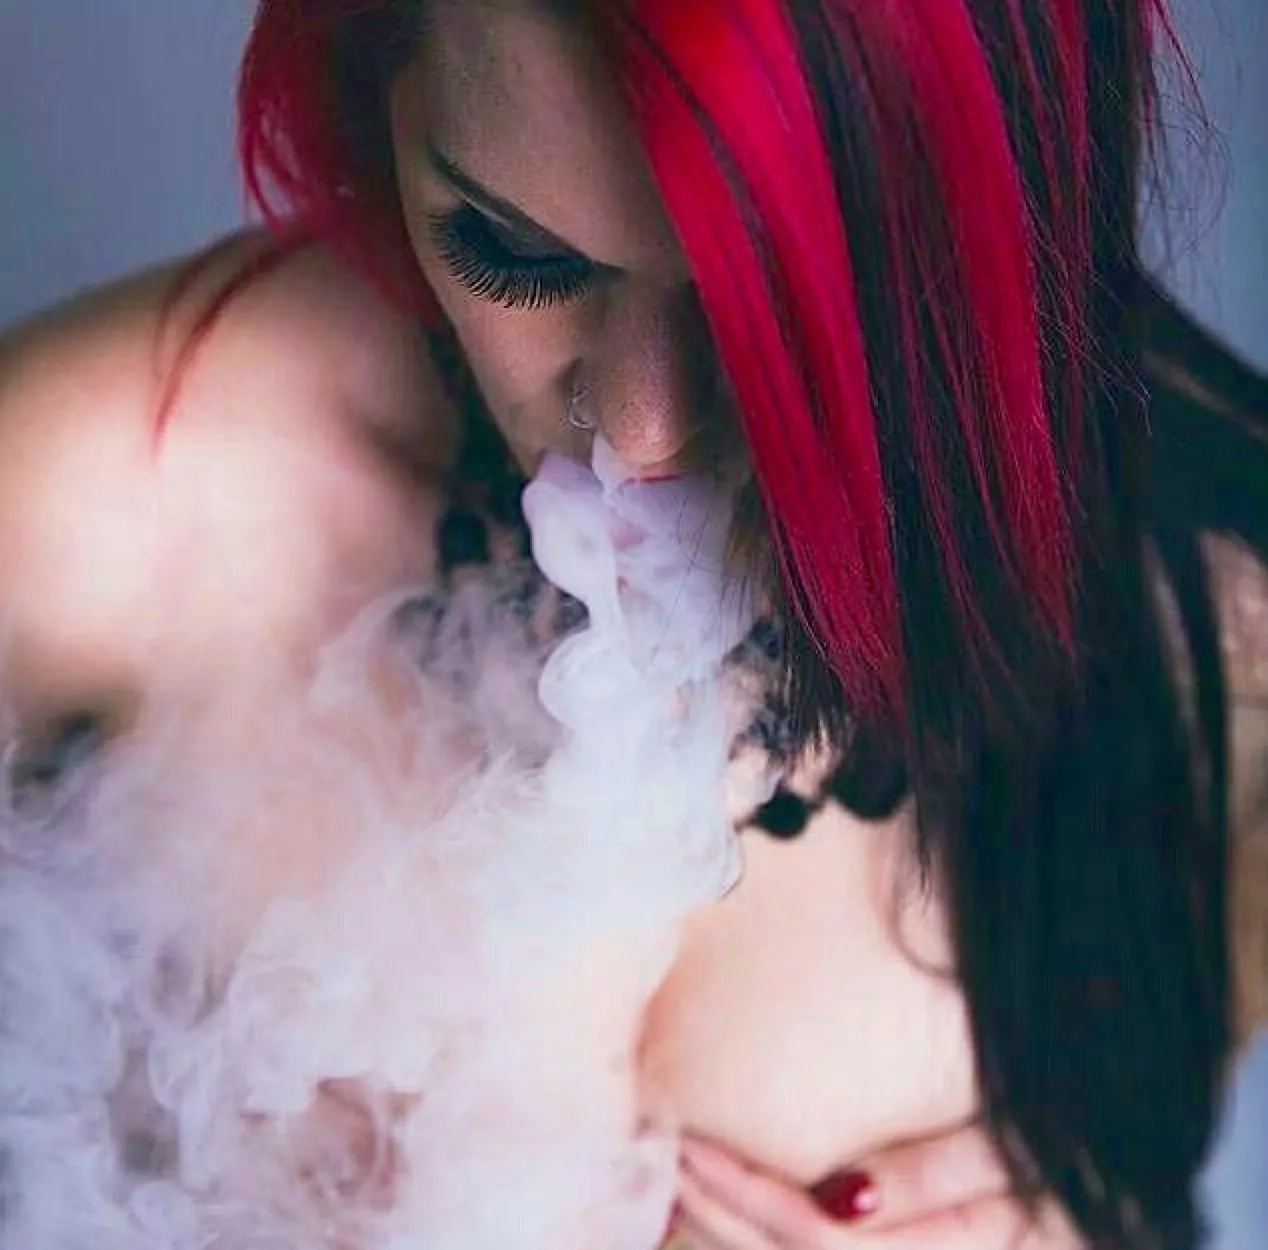 vaping and sex